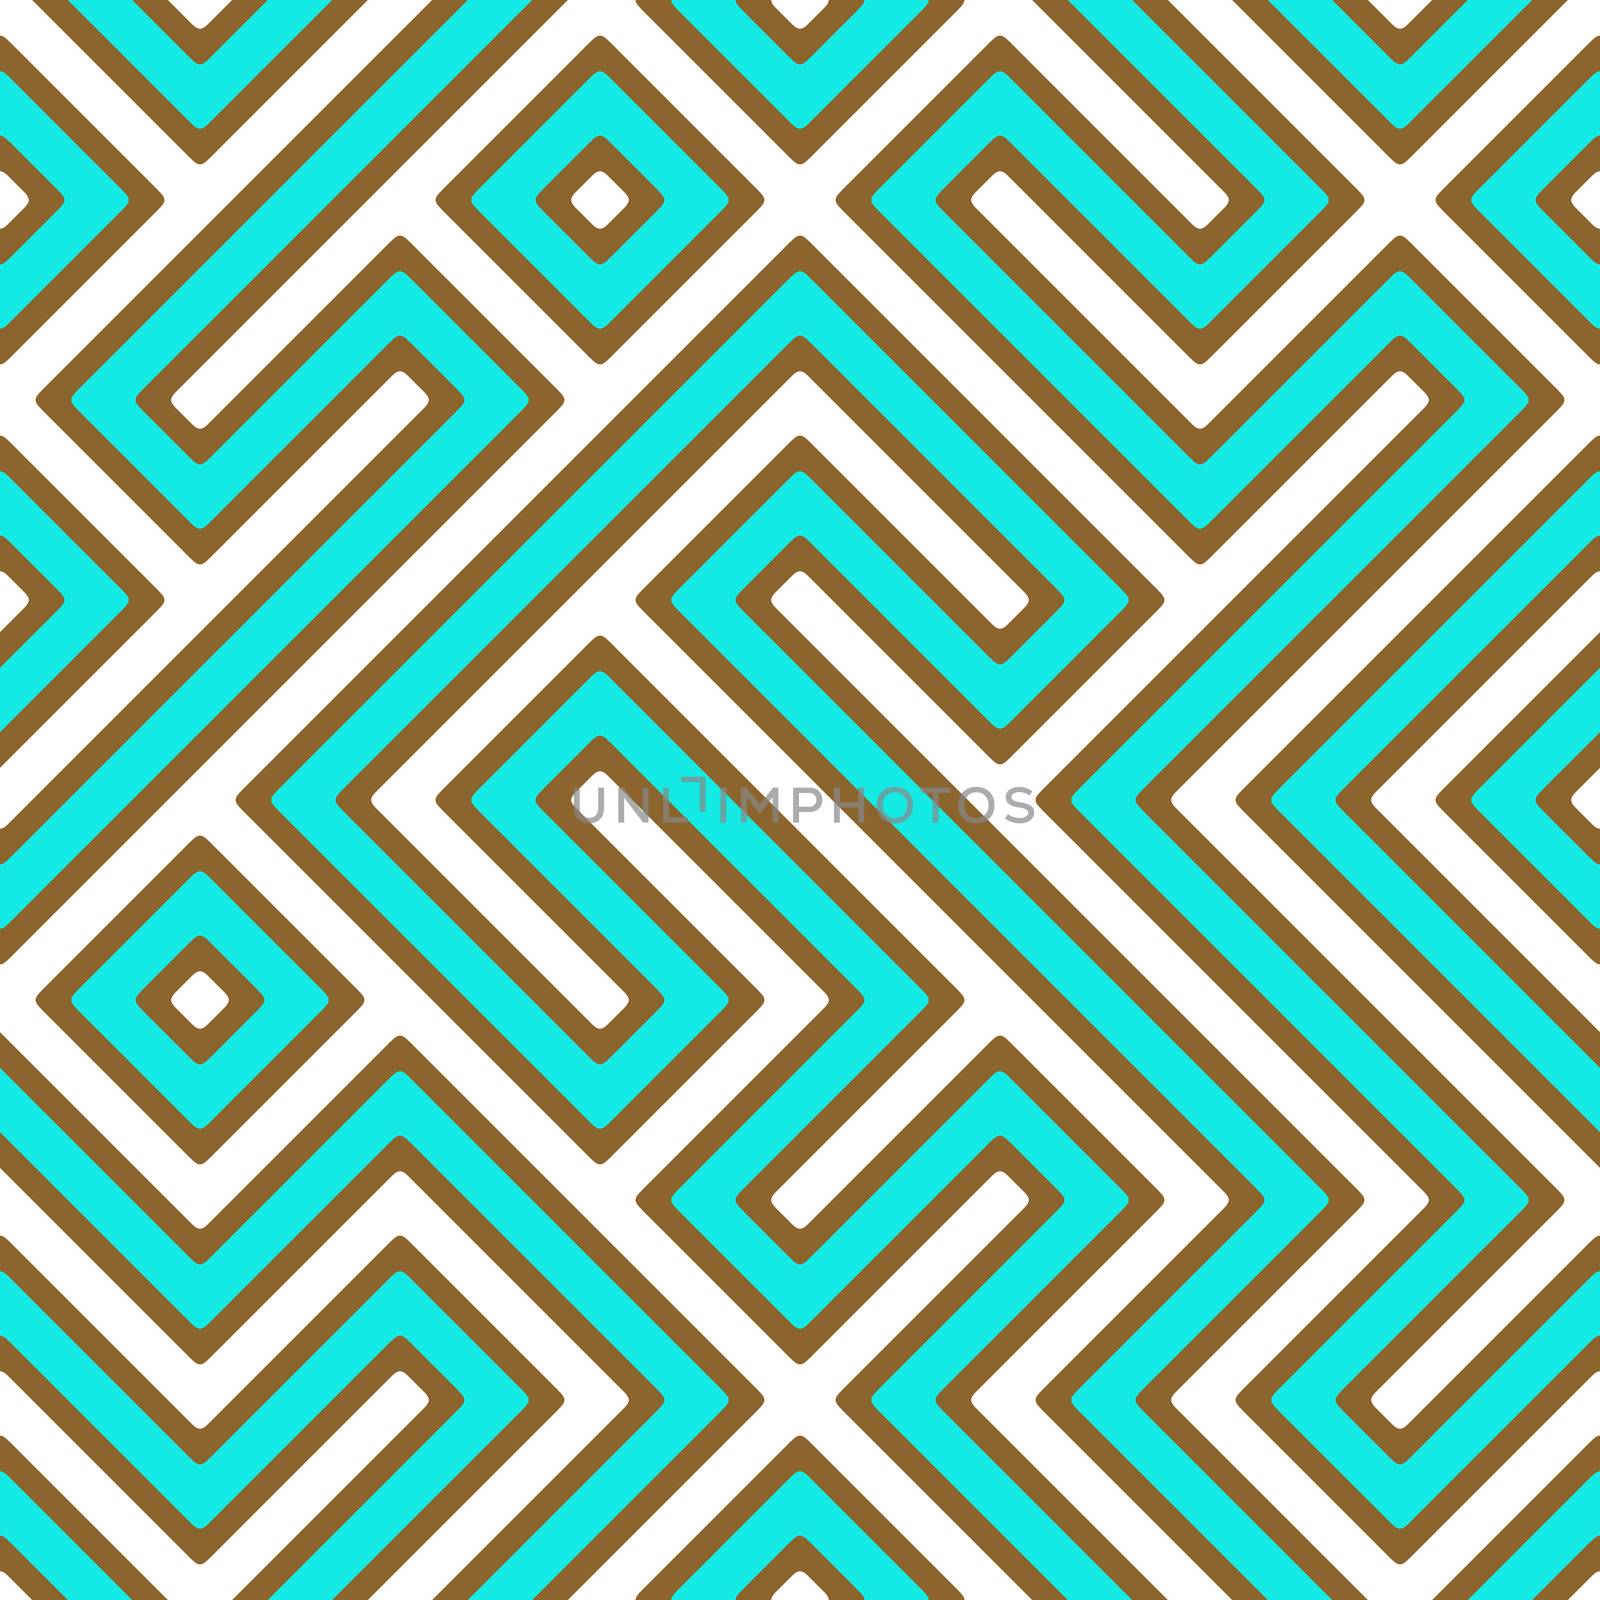 An abstract geometric maze background that tiles seamlessly in any direction.